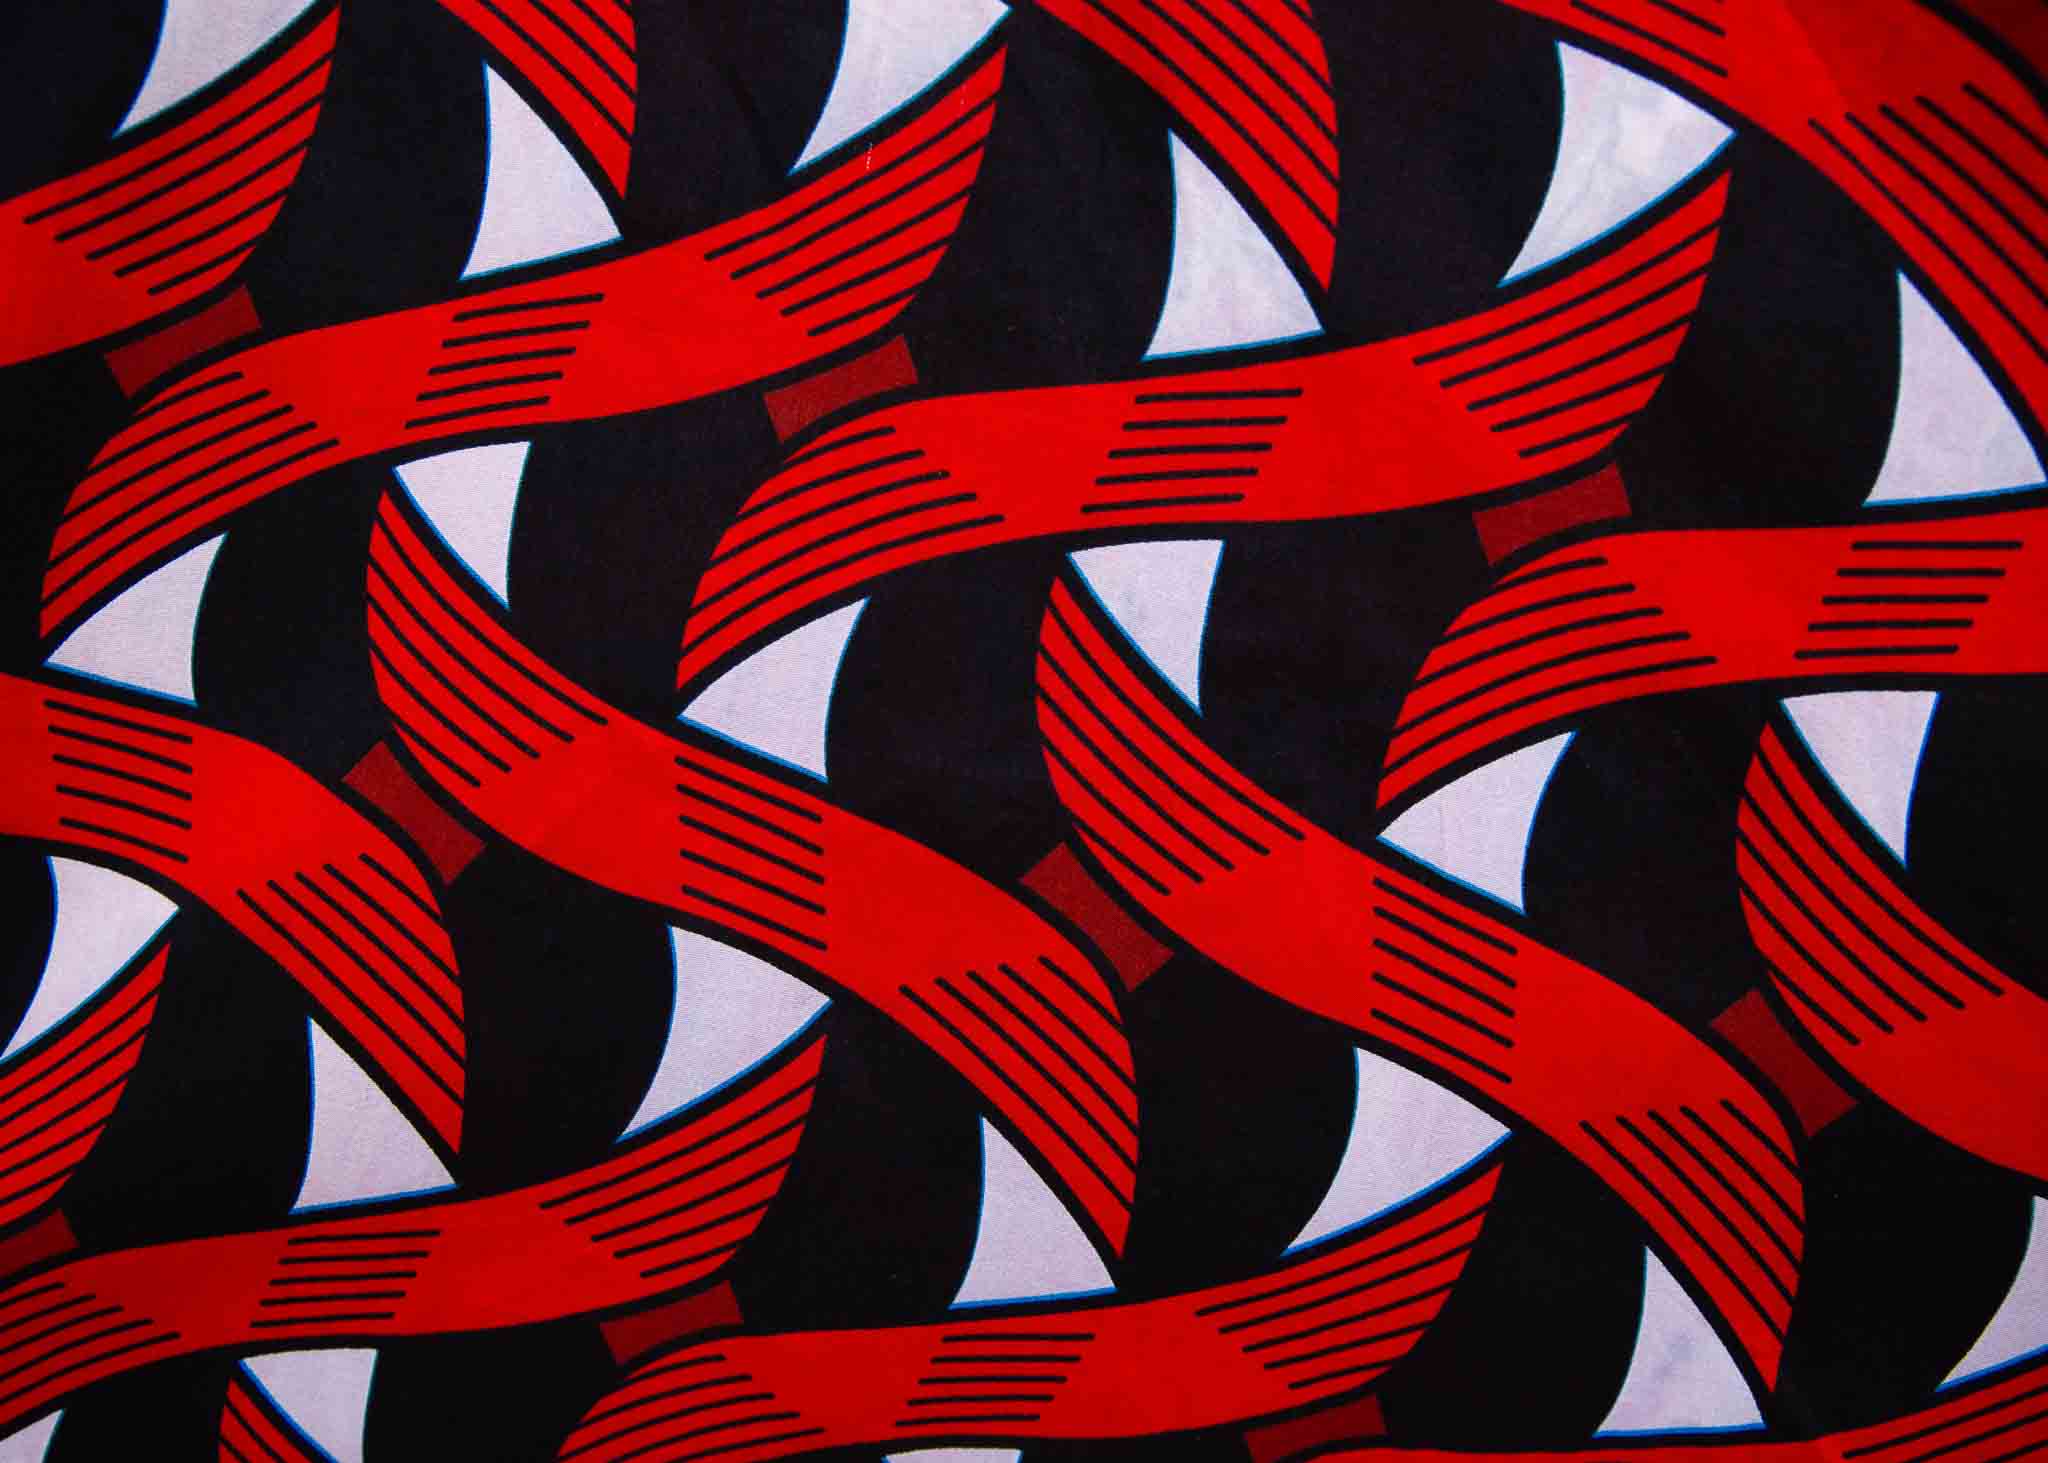 Display of red, black and white ribbon print dress.